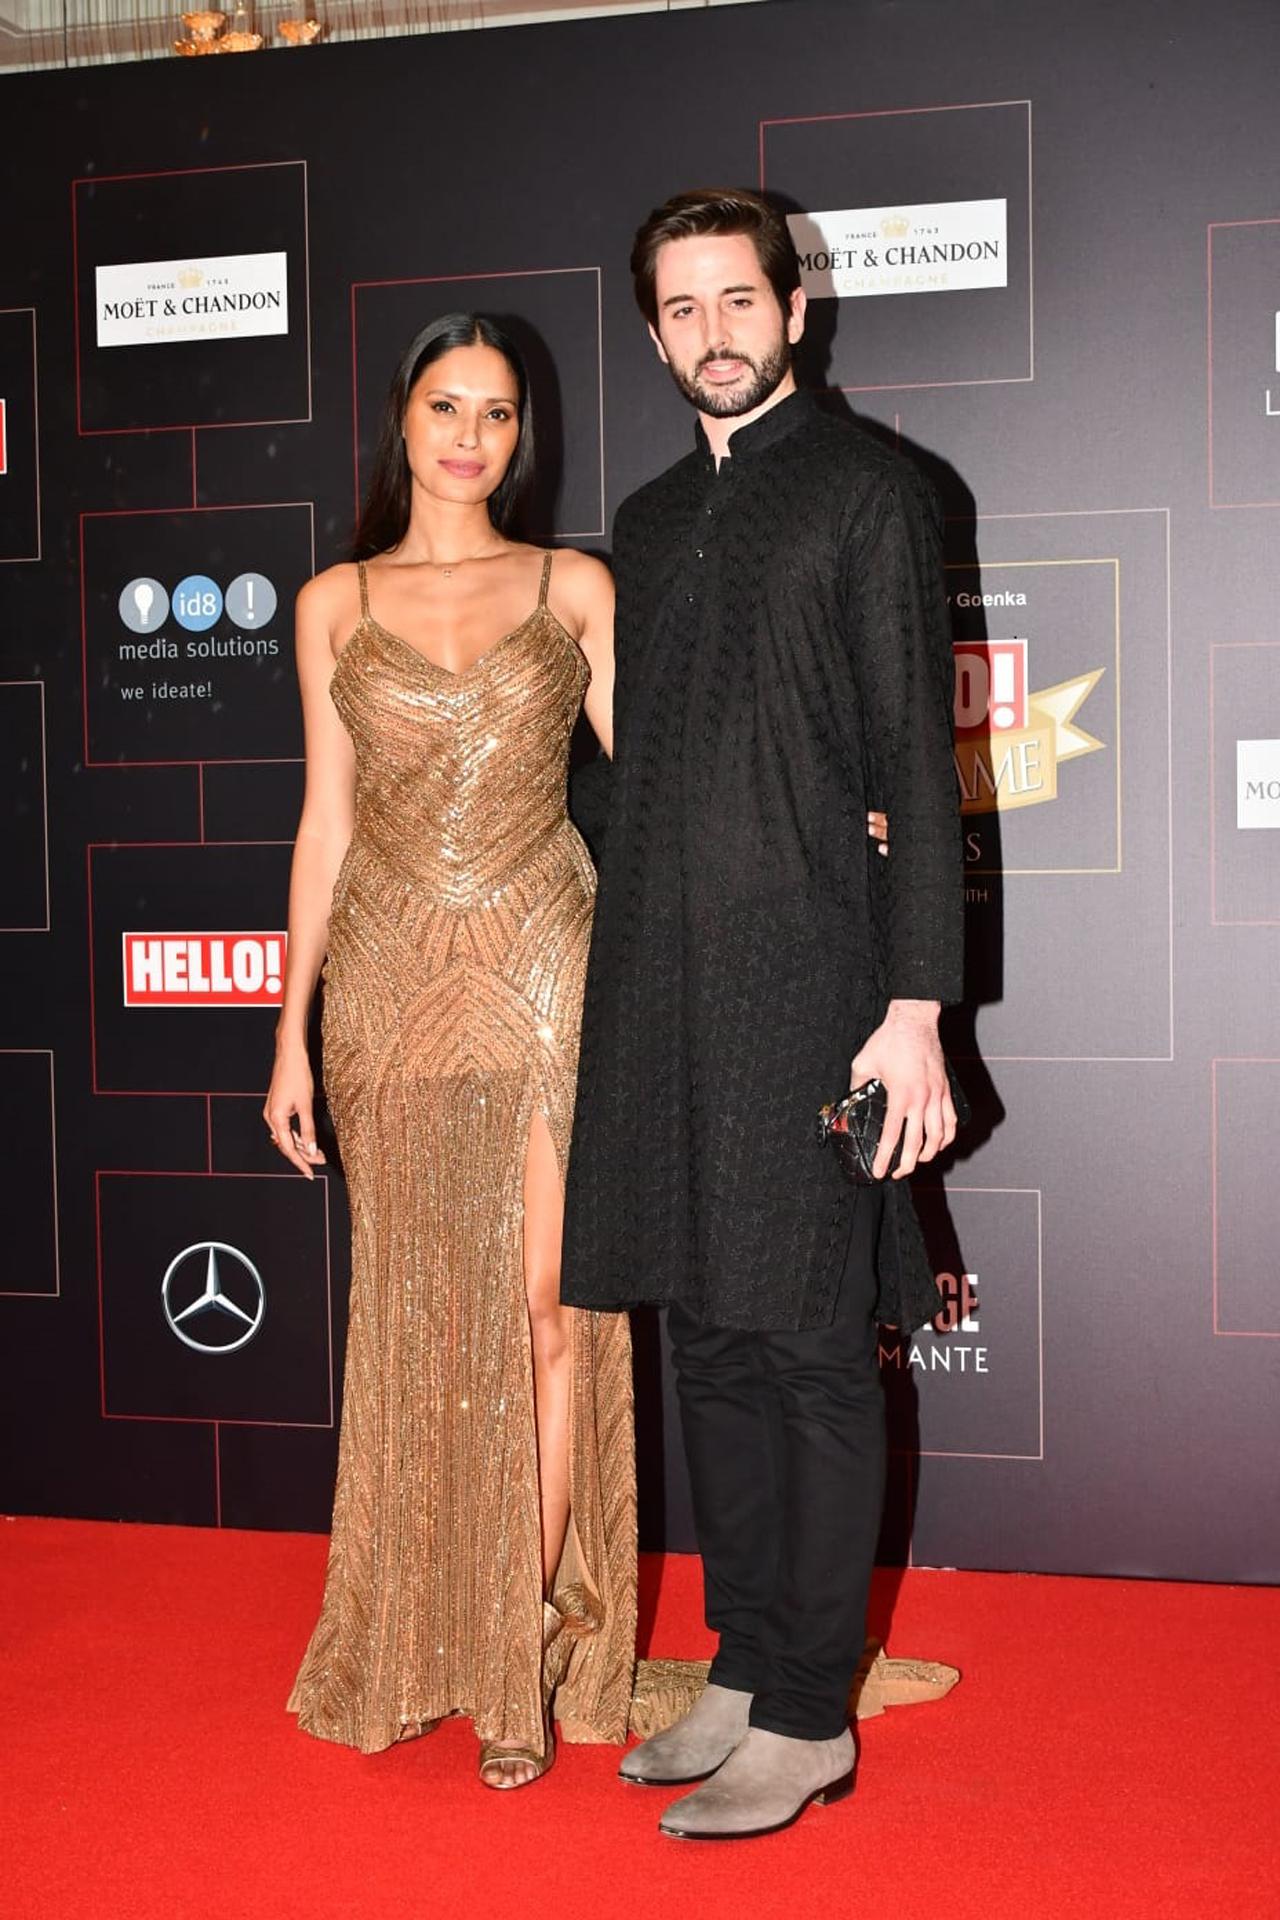 Ujjwala Raut, the popular Indian supermodel, looked ravishing in a golden gown as she walked the red carpet with her friend.